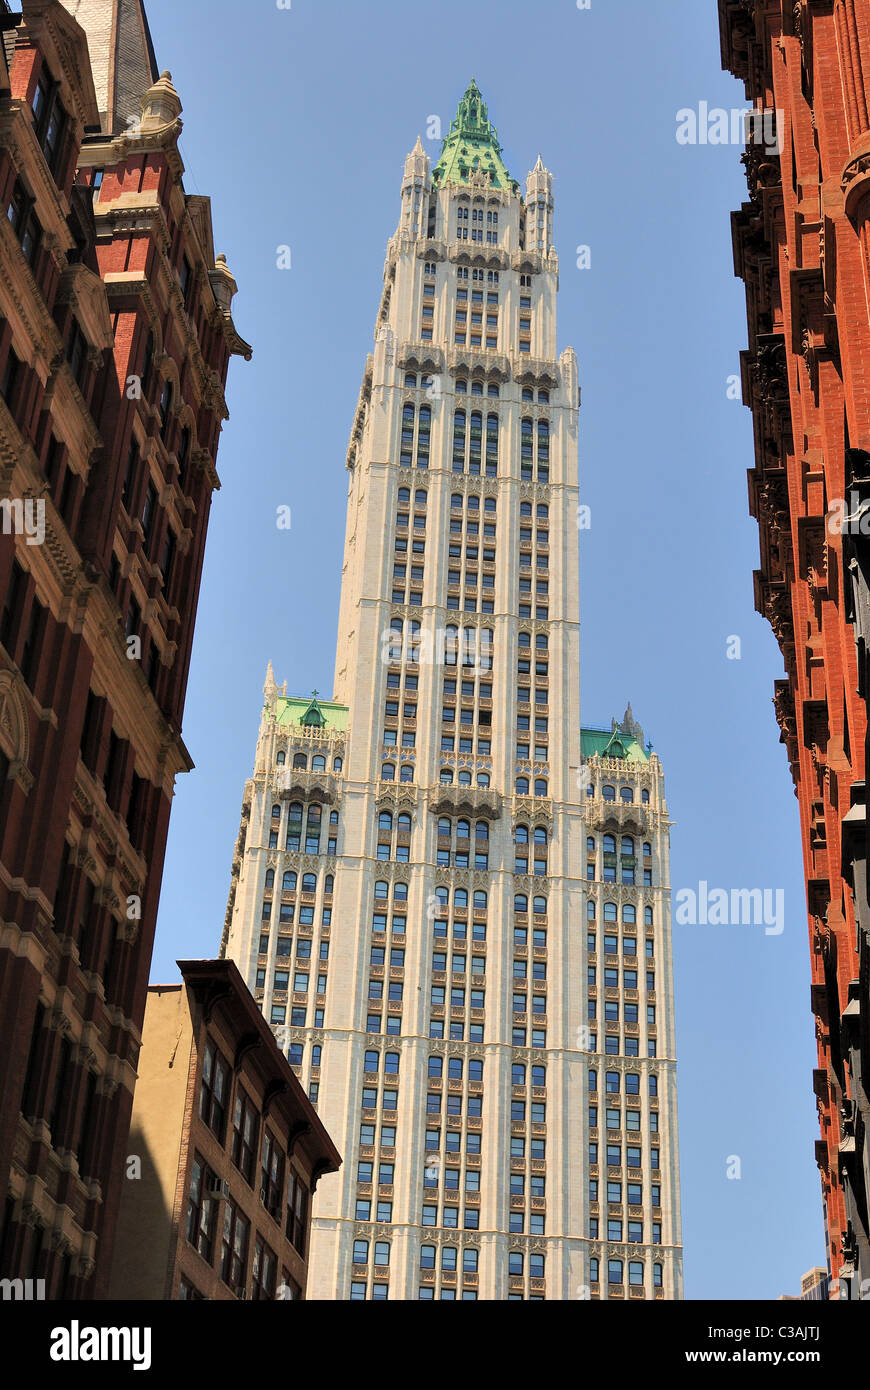 woolworth building in new york city Stock Photo